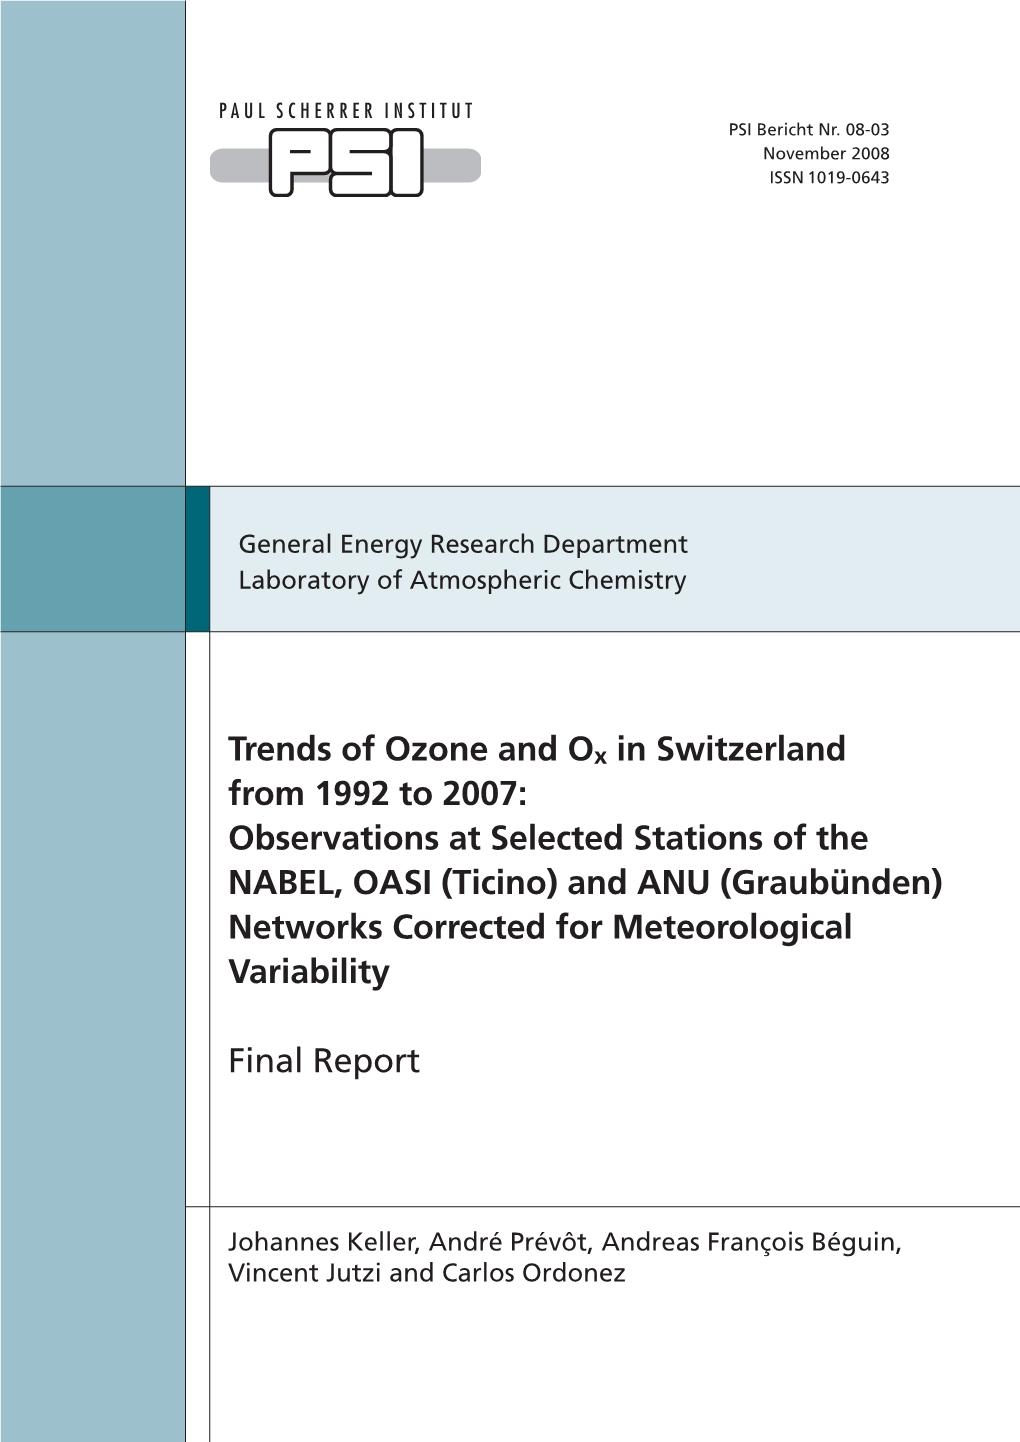 Trends of Ozone and Ox in Switzerland from 1992